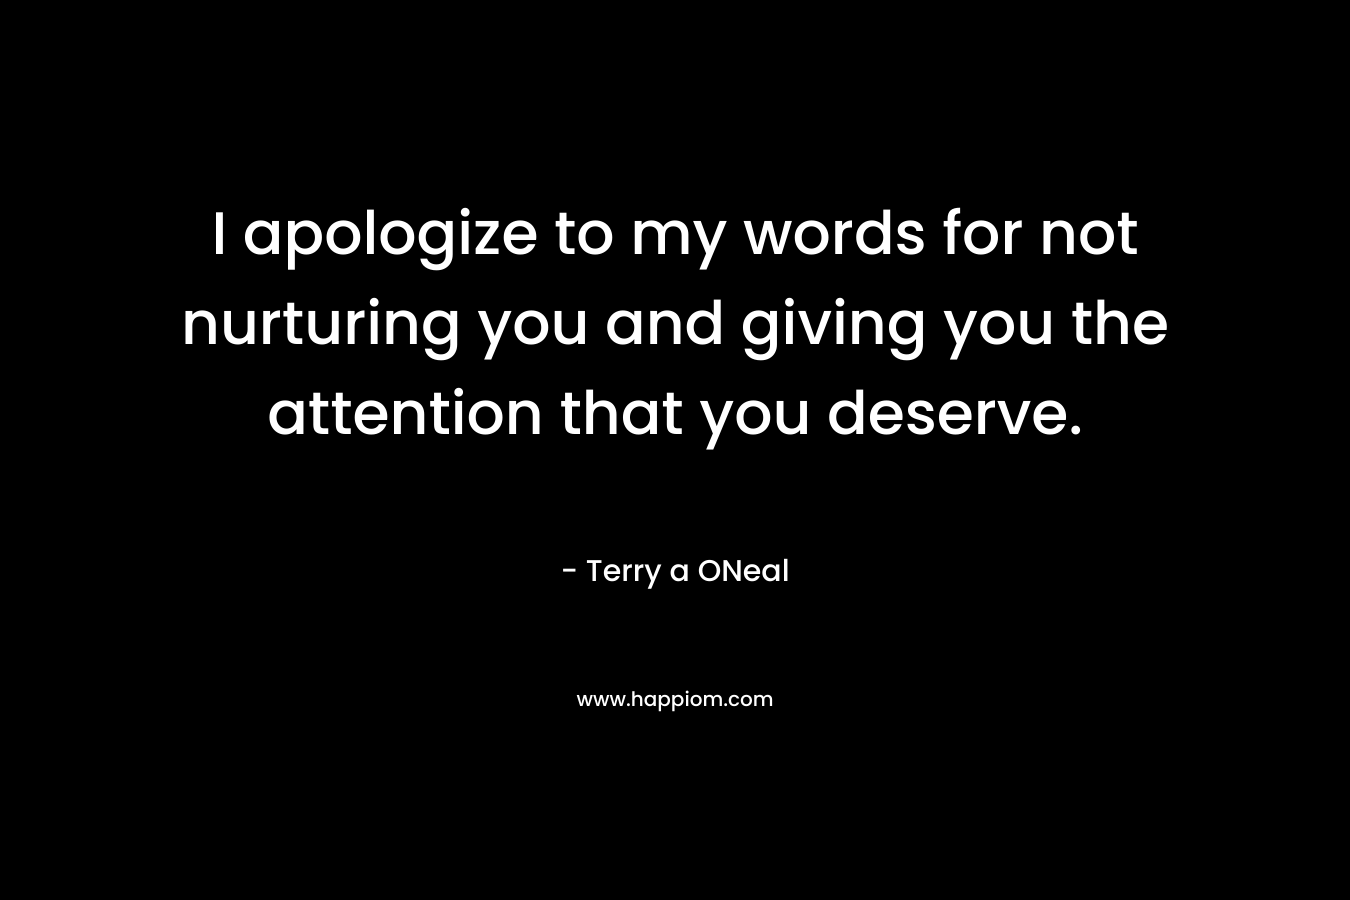 I apologize to my words for not nurturing you and giving you the attention that you deserve. – Terry a ONeal